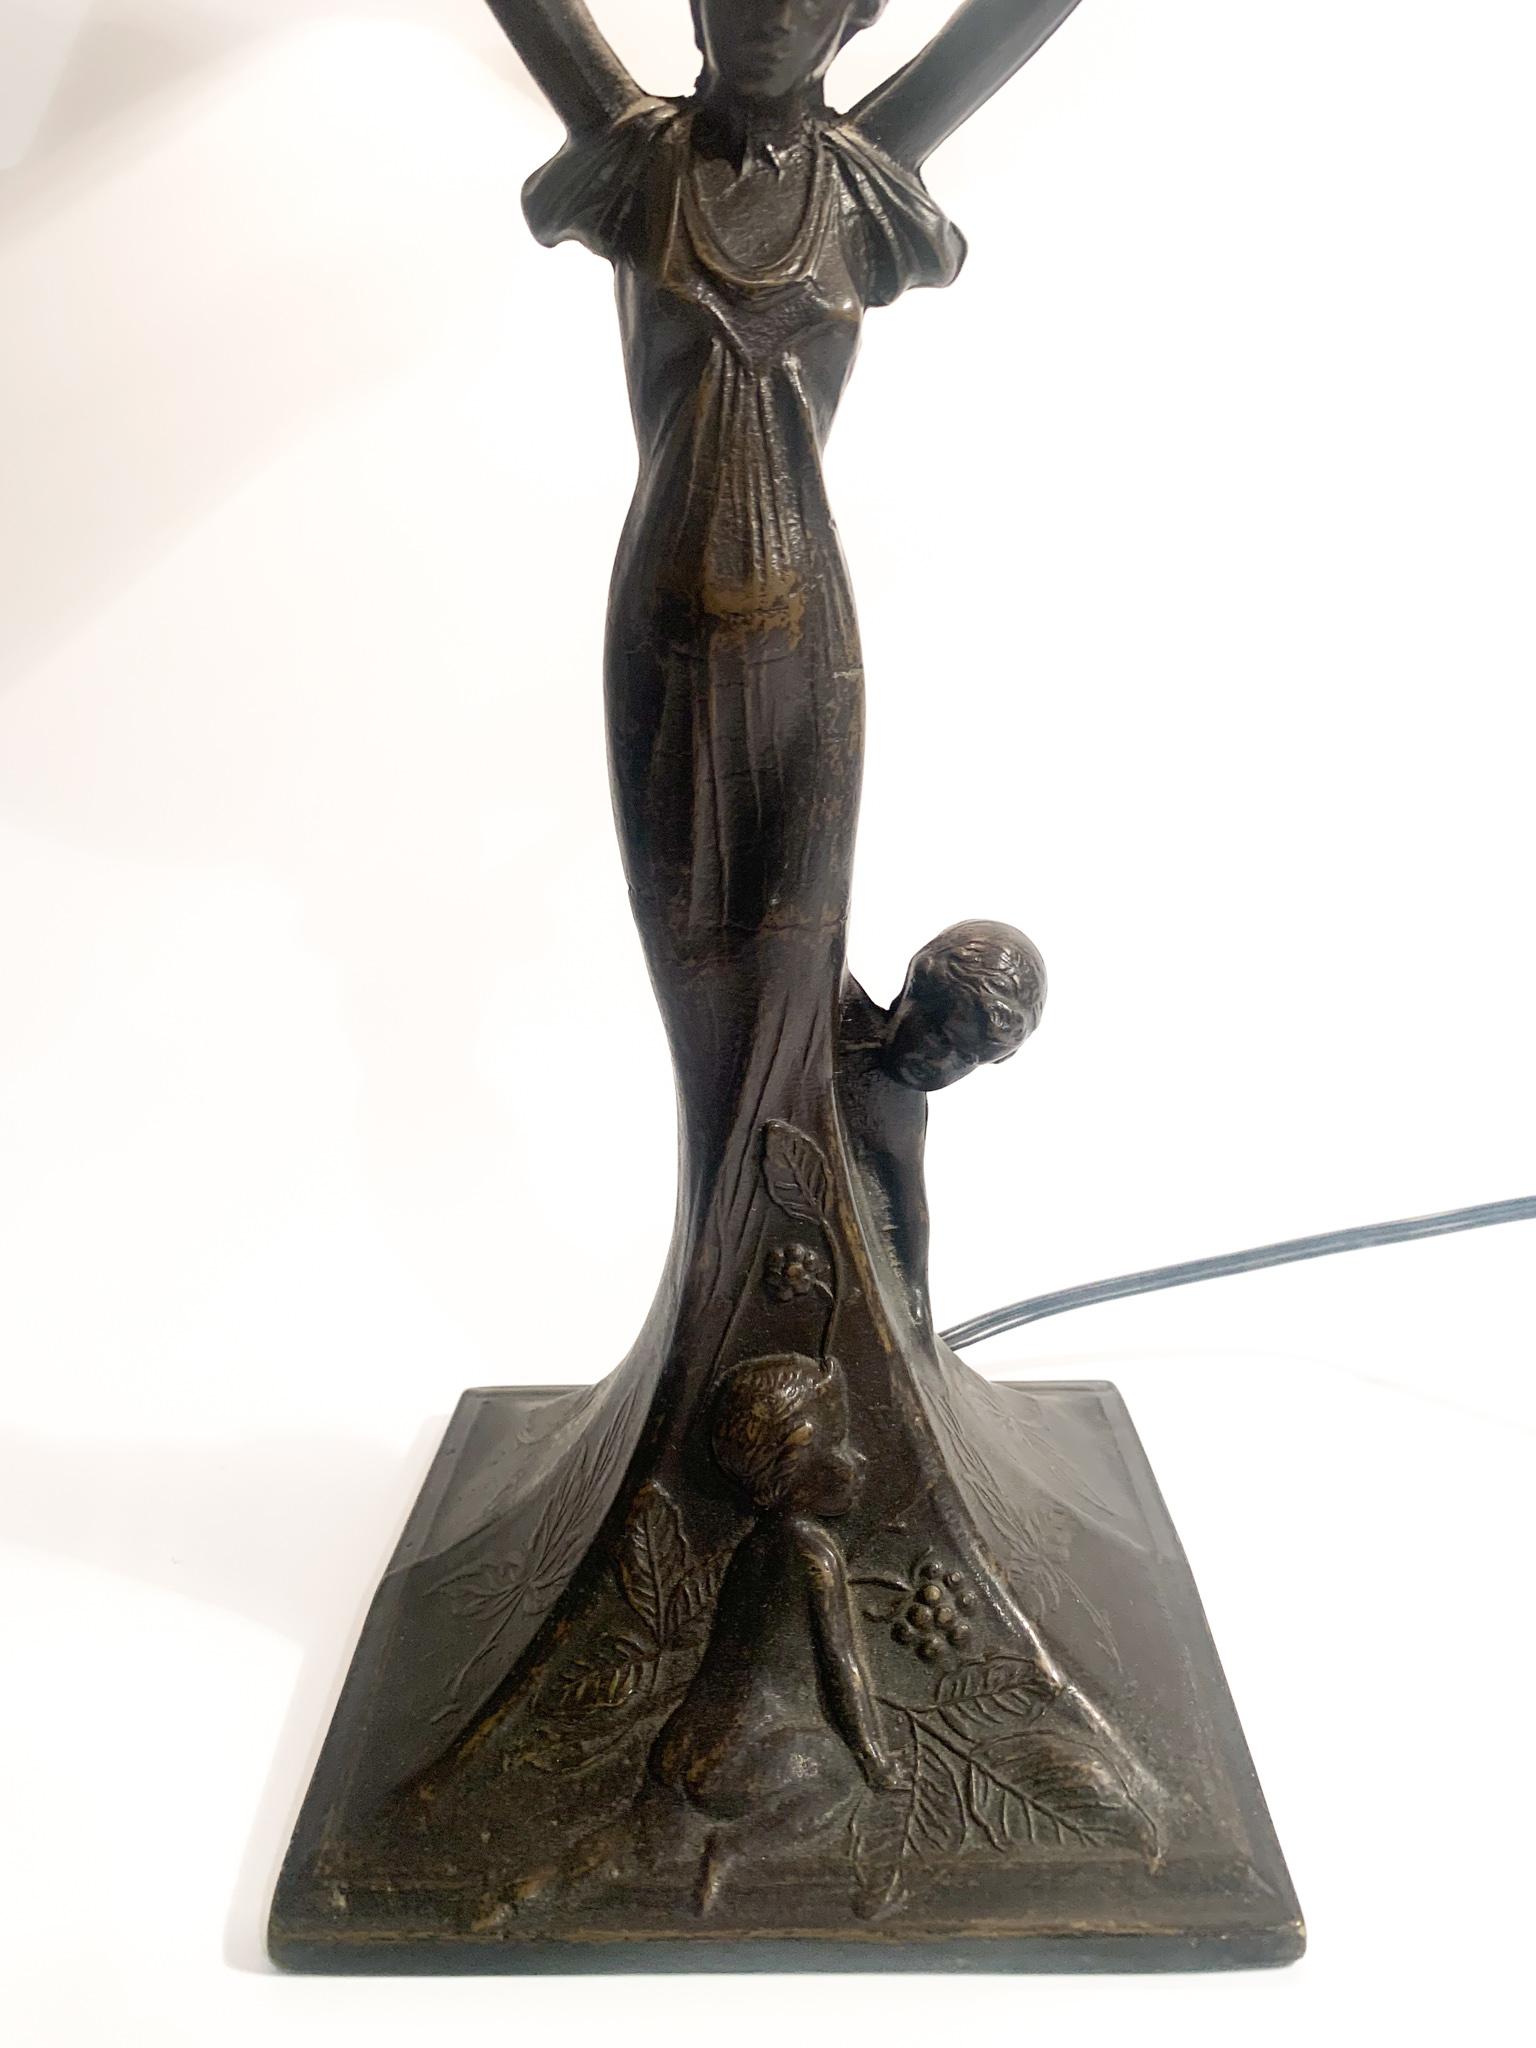 20th Century French Art Nouveau Table Lamp in Bronze and Glass from the Early XX Century